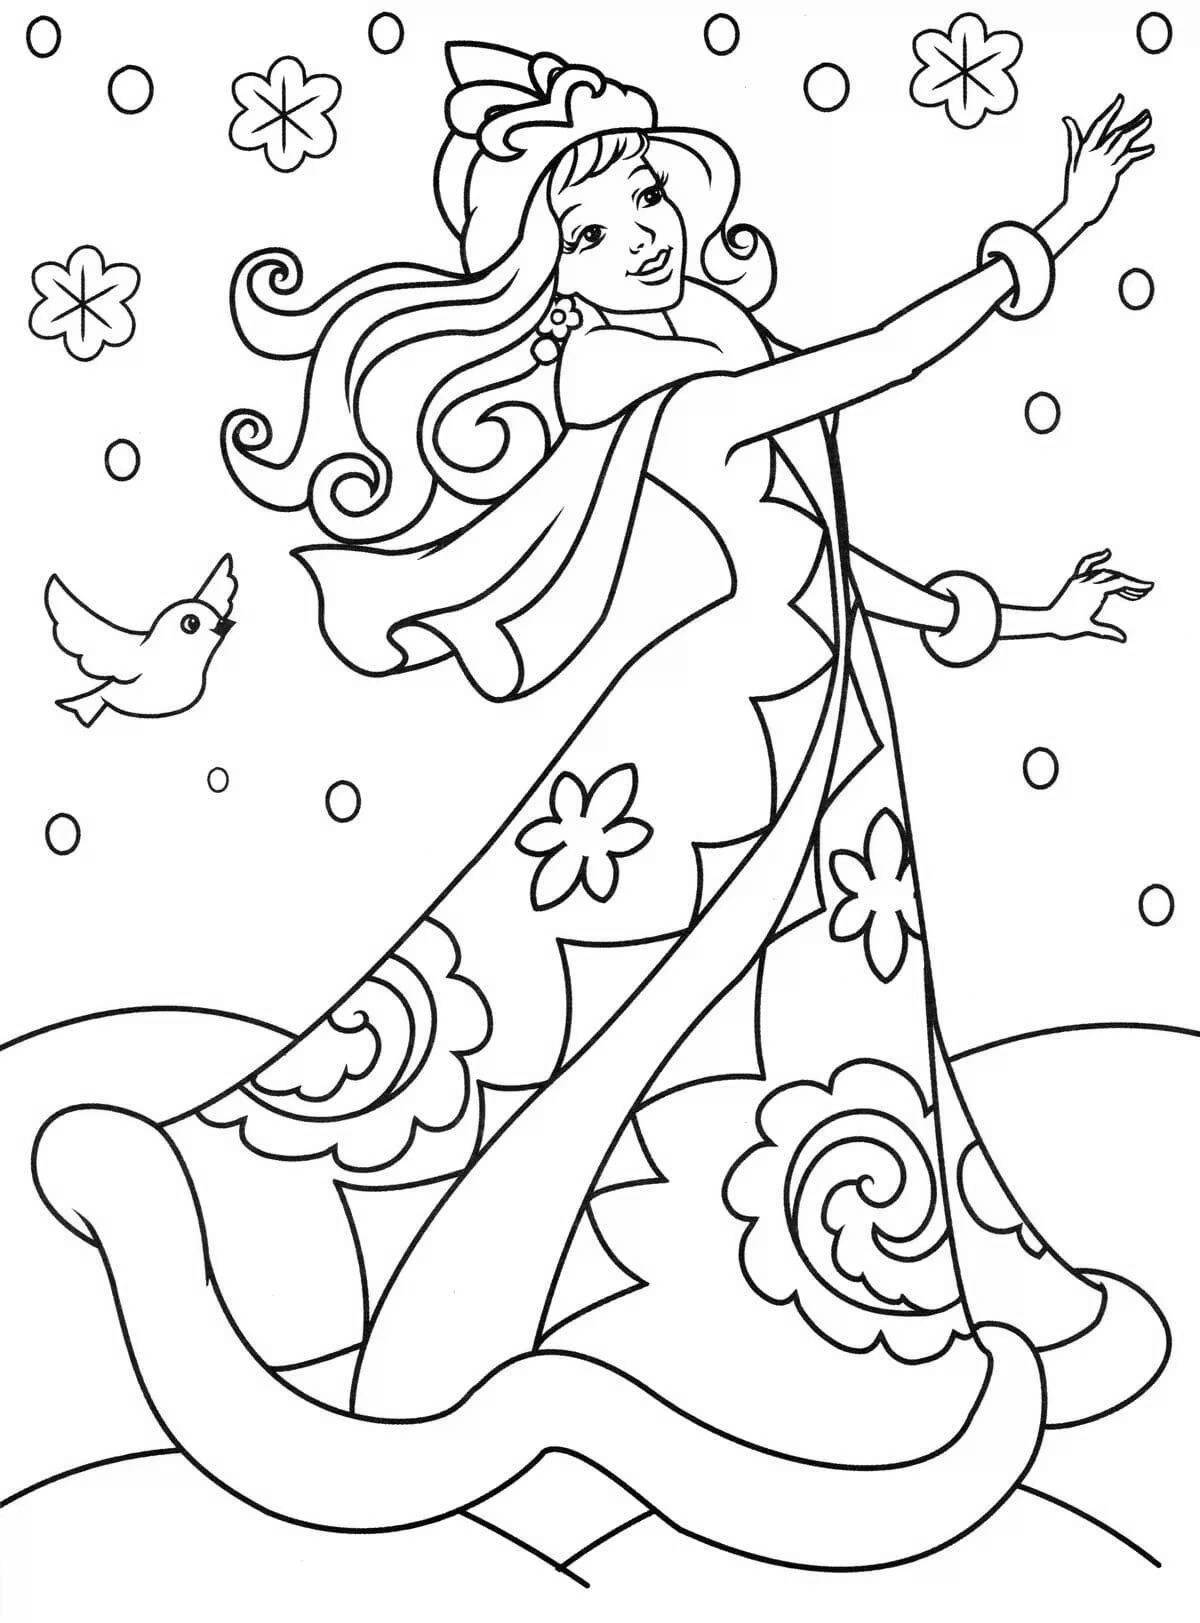 Fairytale winter coloring for girls